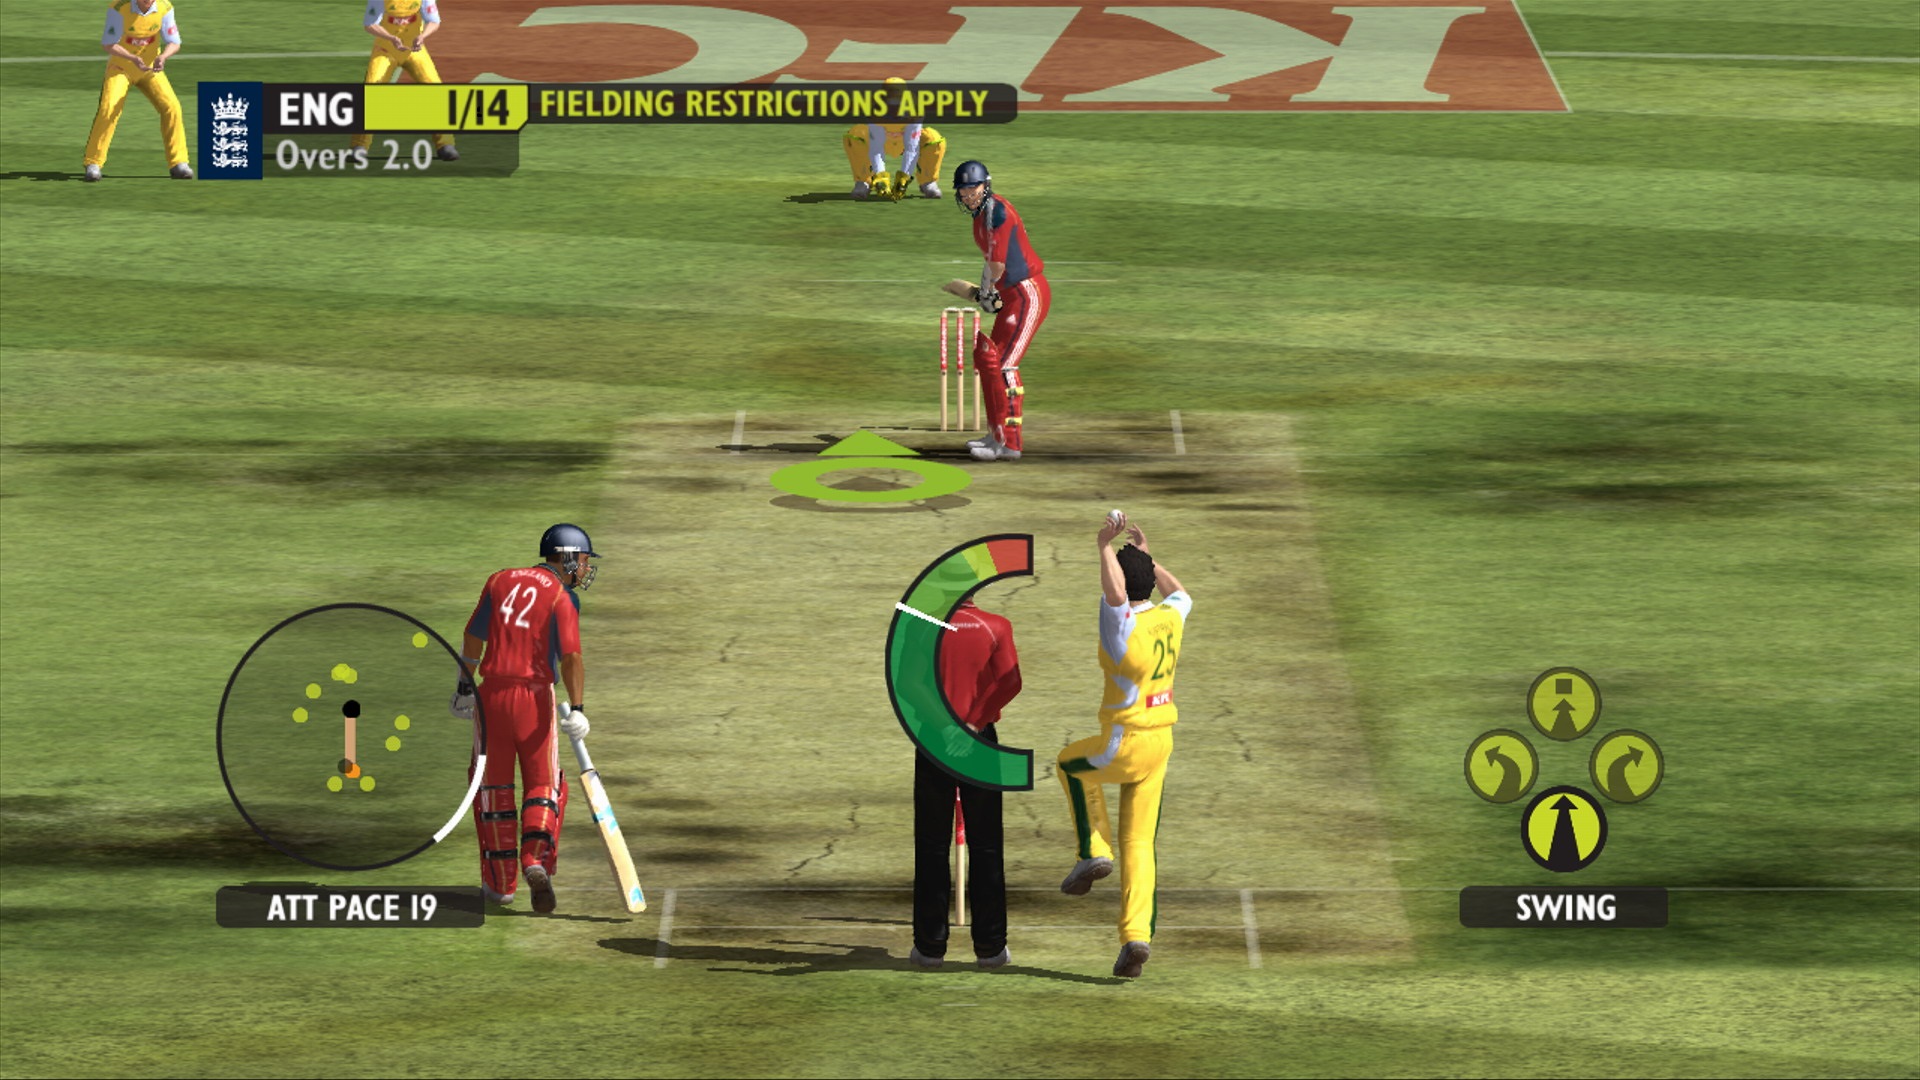 Cricket 19 pc game download